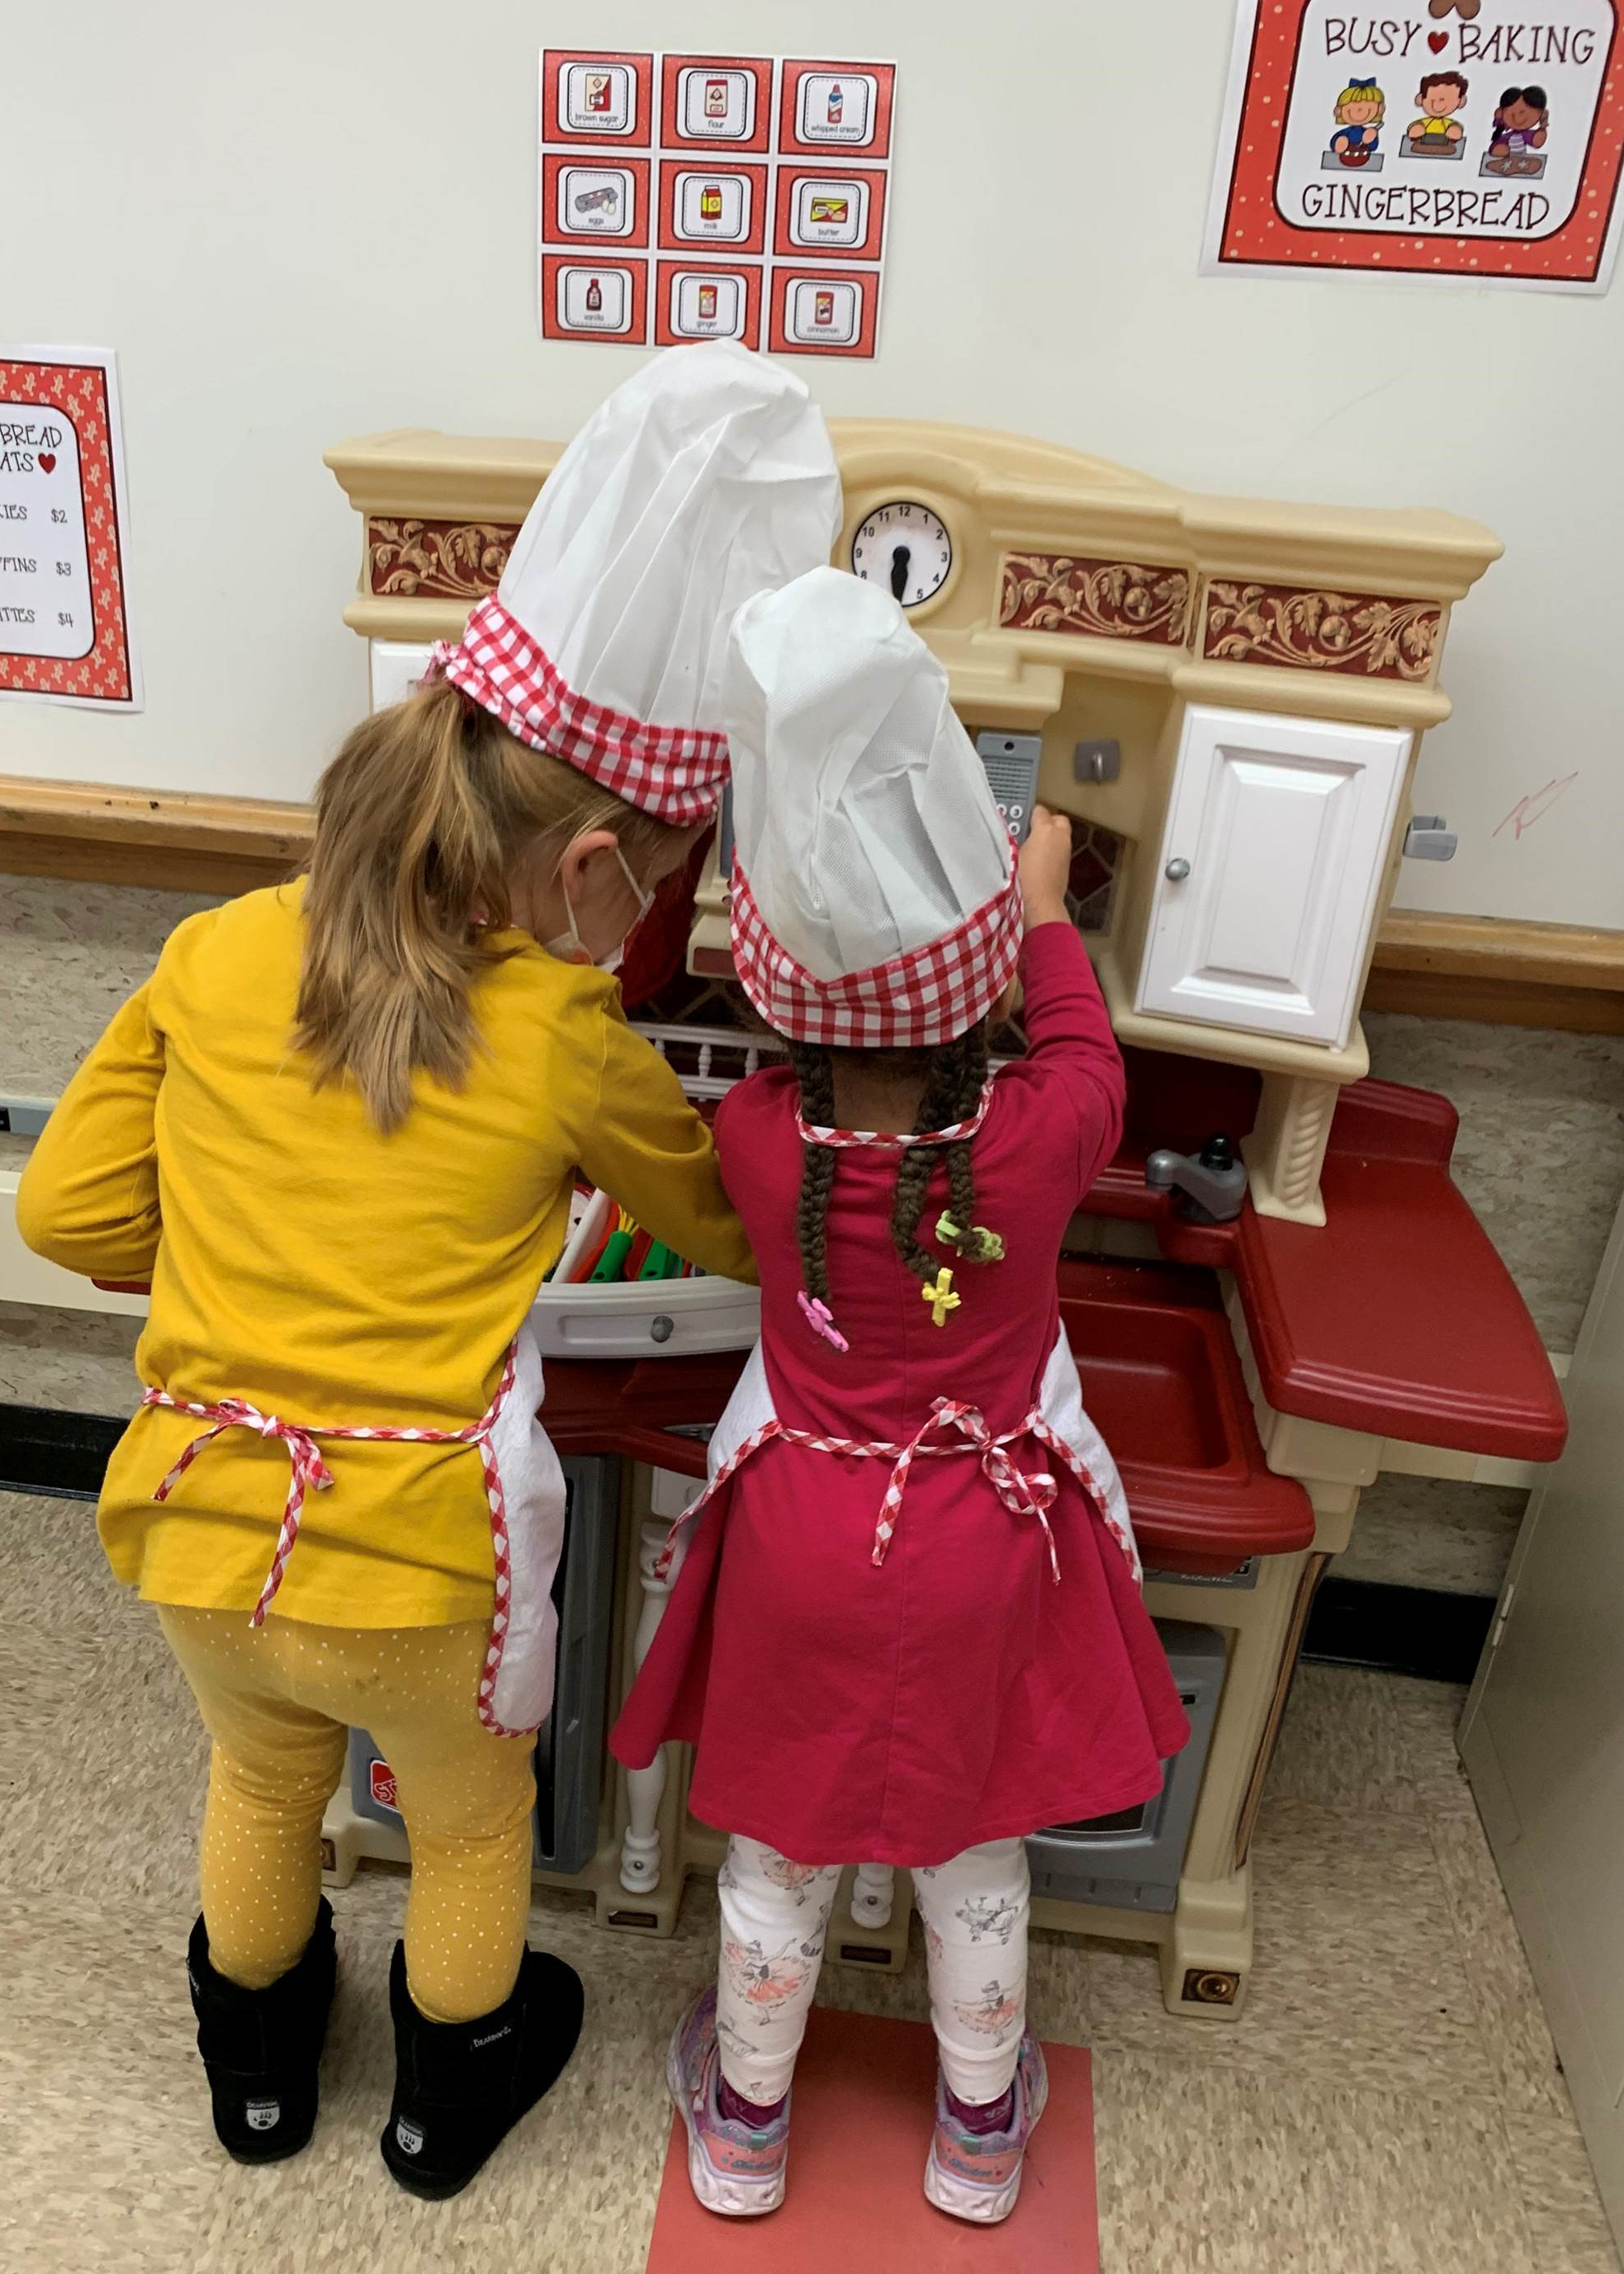 Two students working together at a bakery center